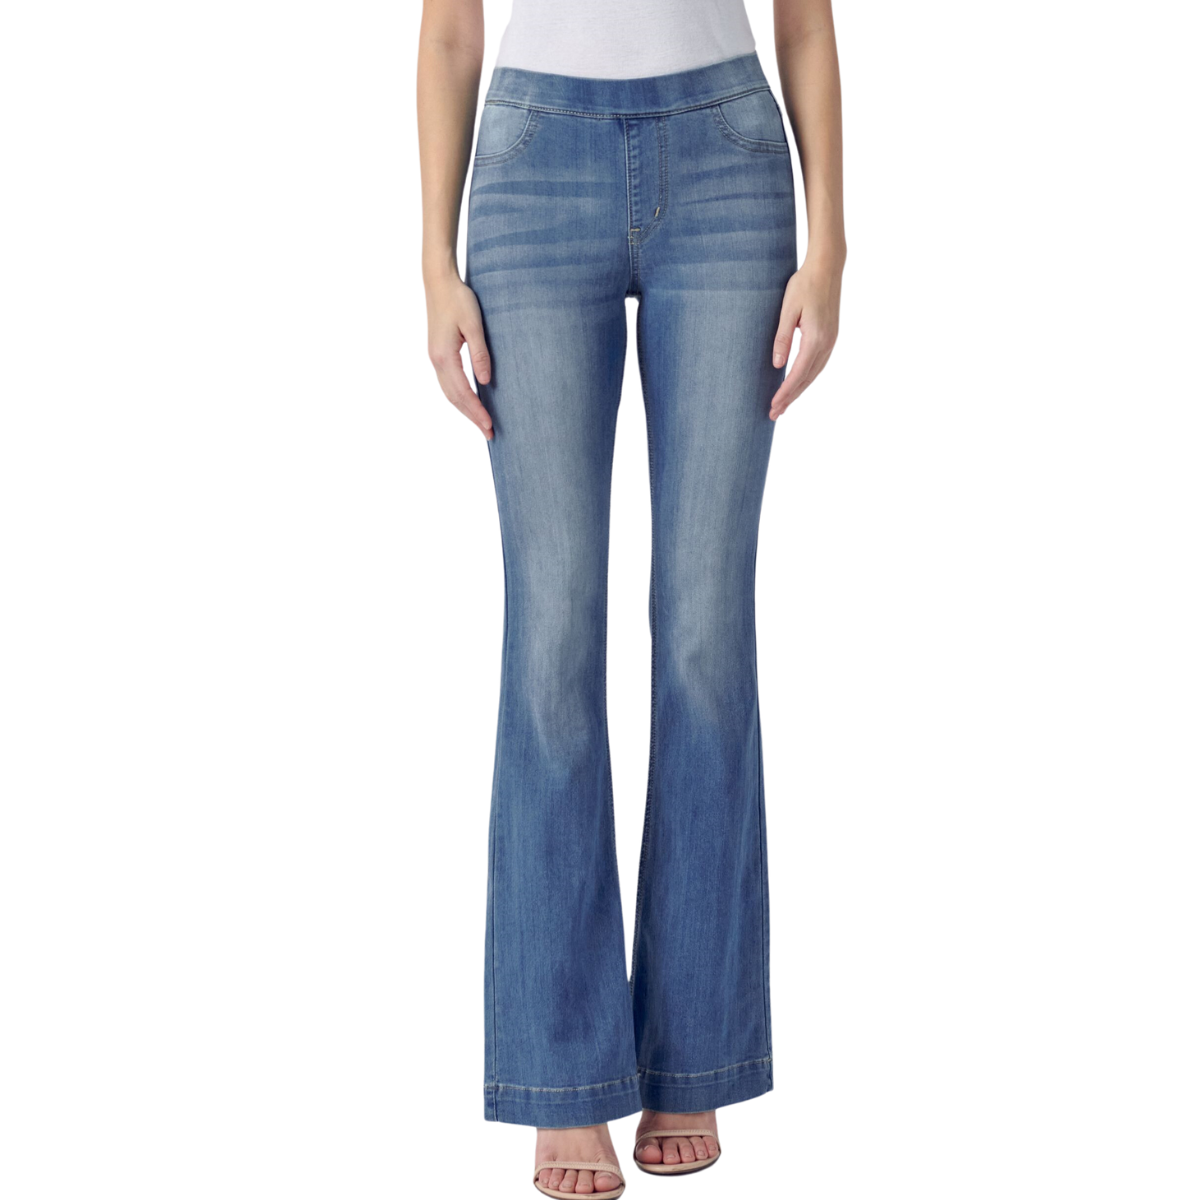 Woman wearing cello pull on mid rise flare jeans 33 inch inseam medium denim standing with hands out of frame.